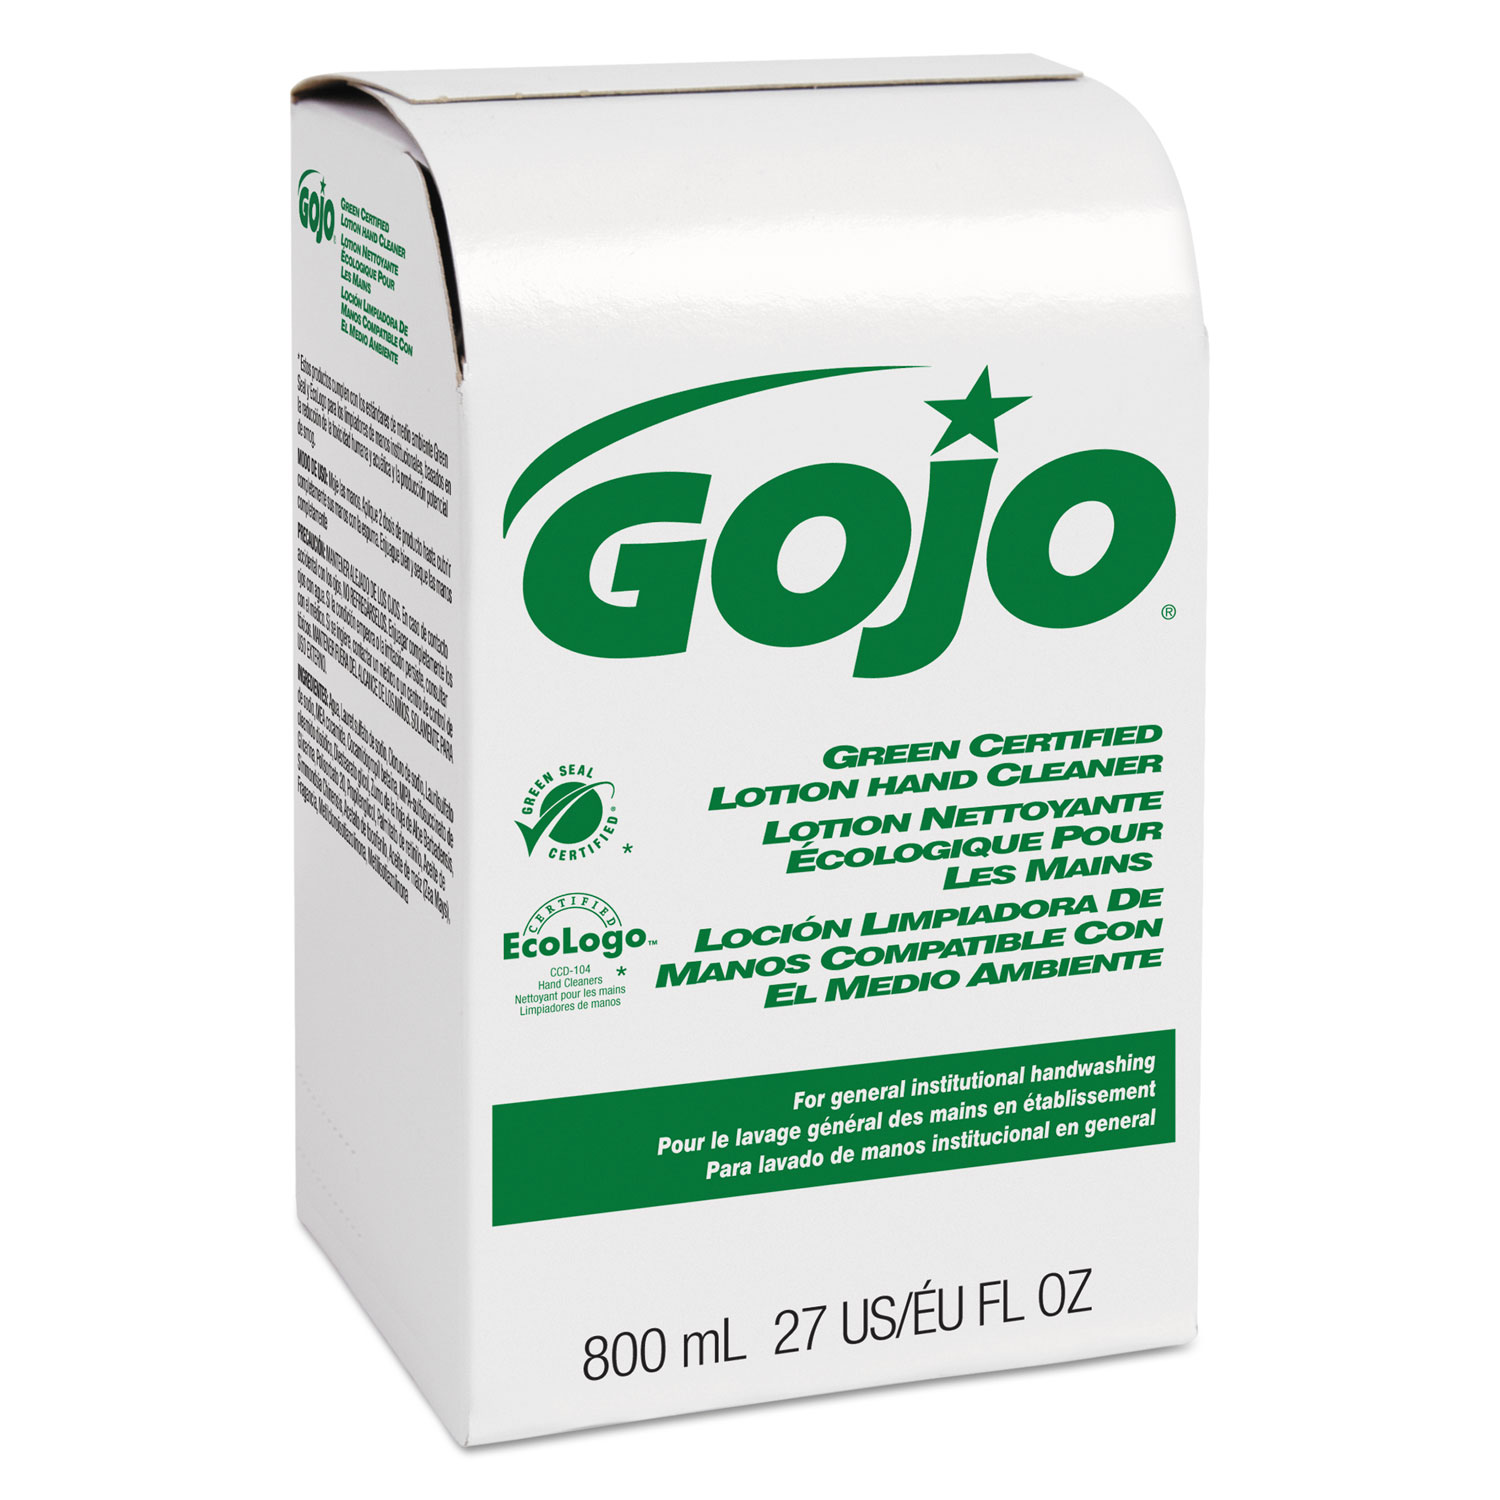  GOJO 9165-12 Green Certified Lotion Hand Cleaner 800mL Bag-in-Box Refill, Light Floral Scent, 12/Carton (GOJ916512CT) 